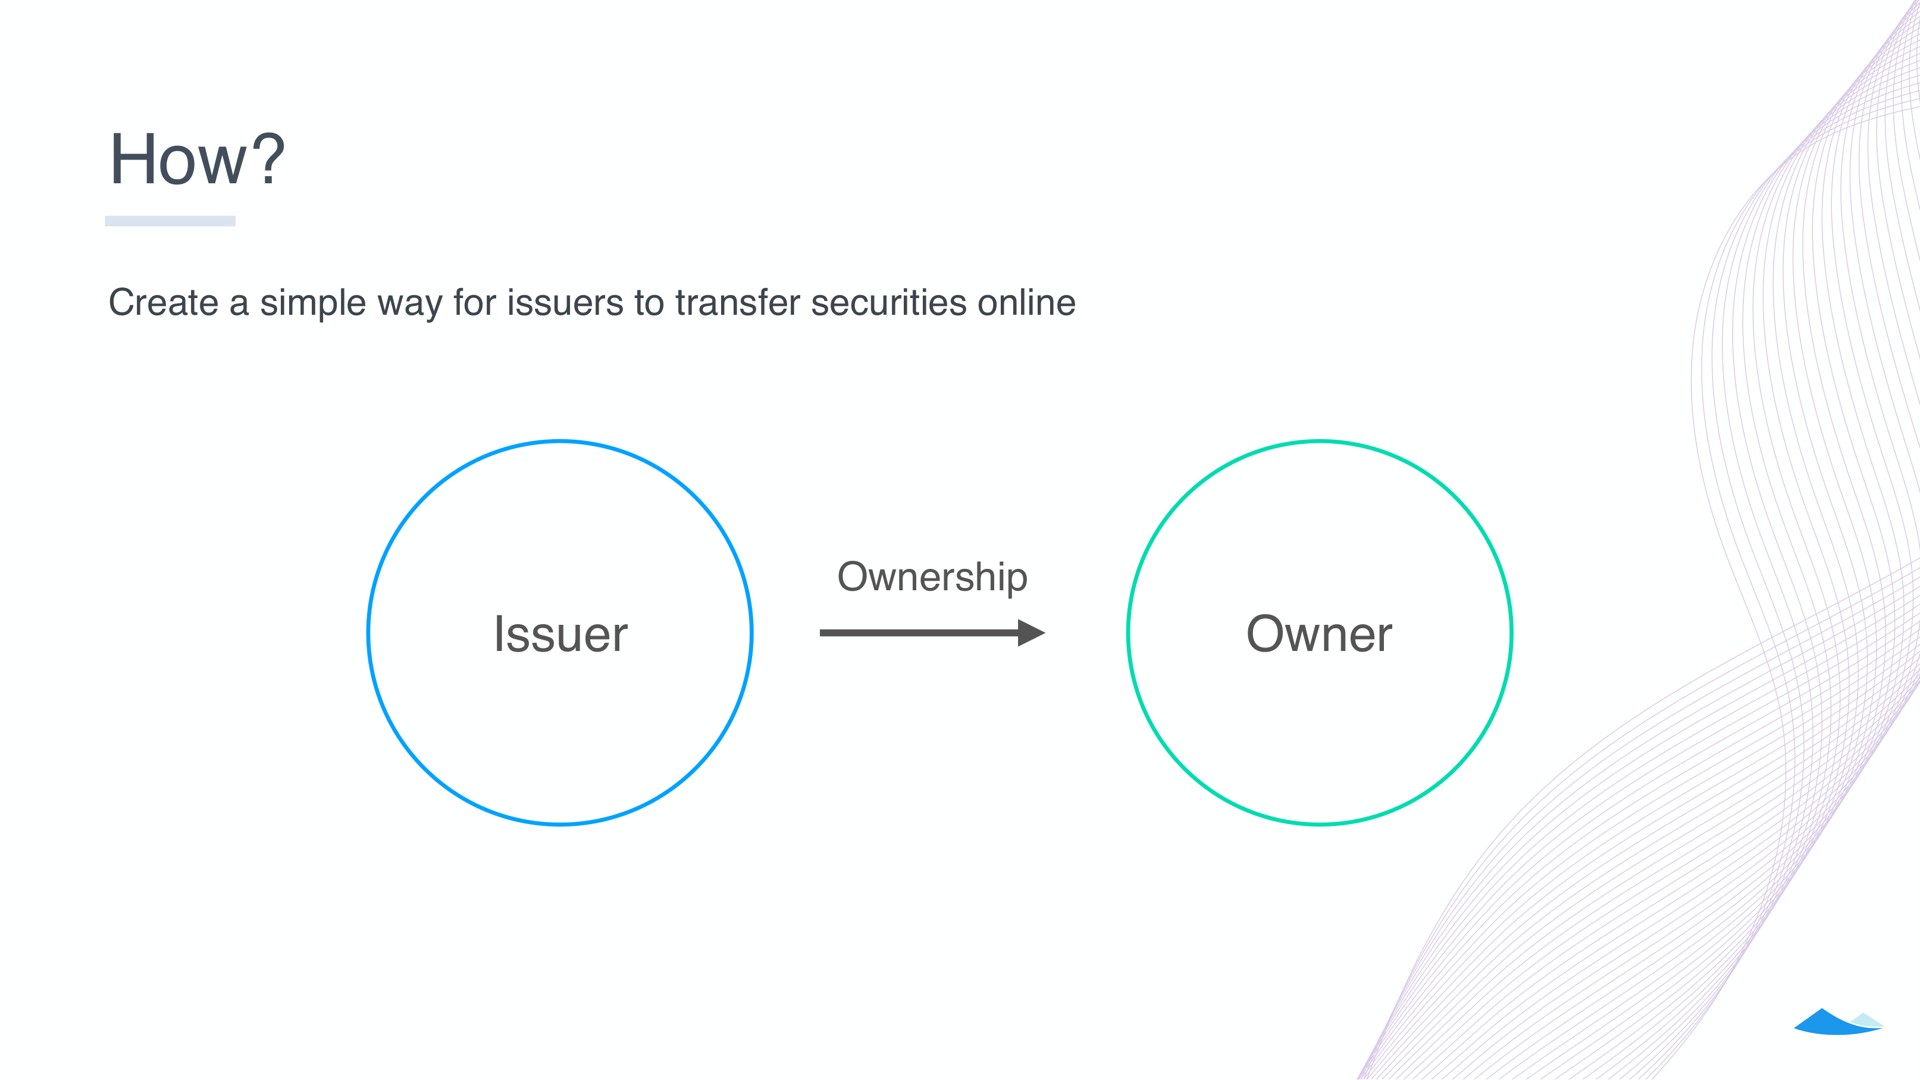 how create a simple way for issuers to transfer securities ownership | Carta